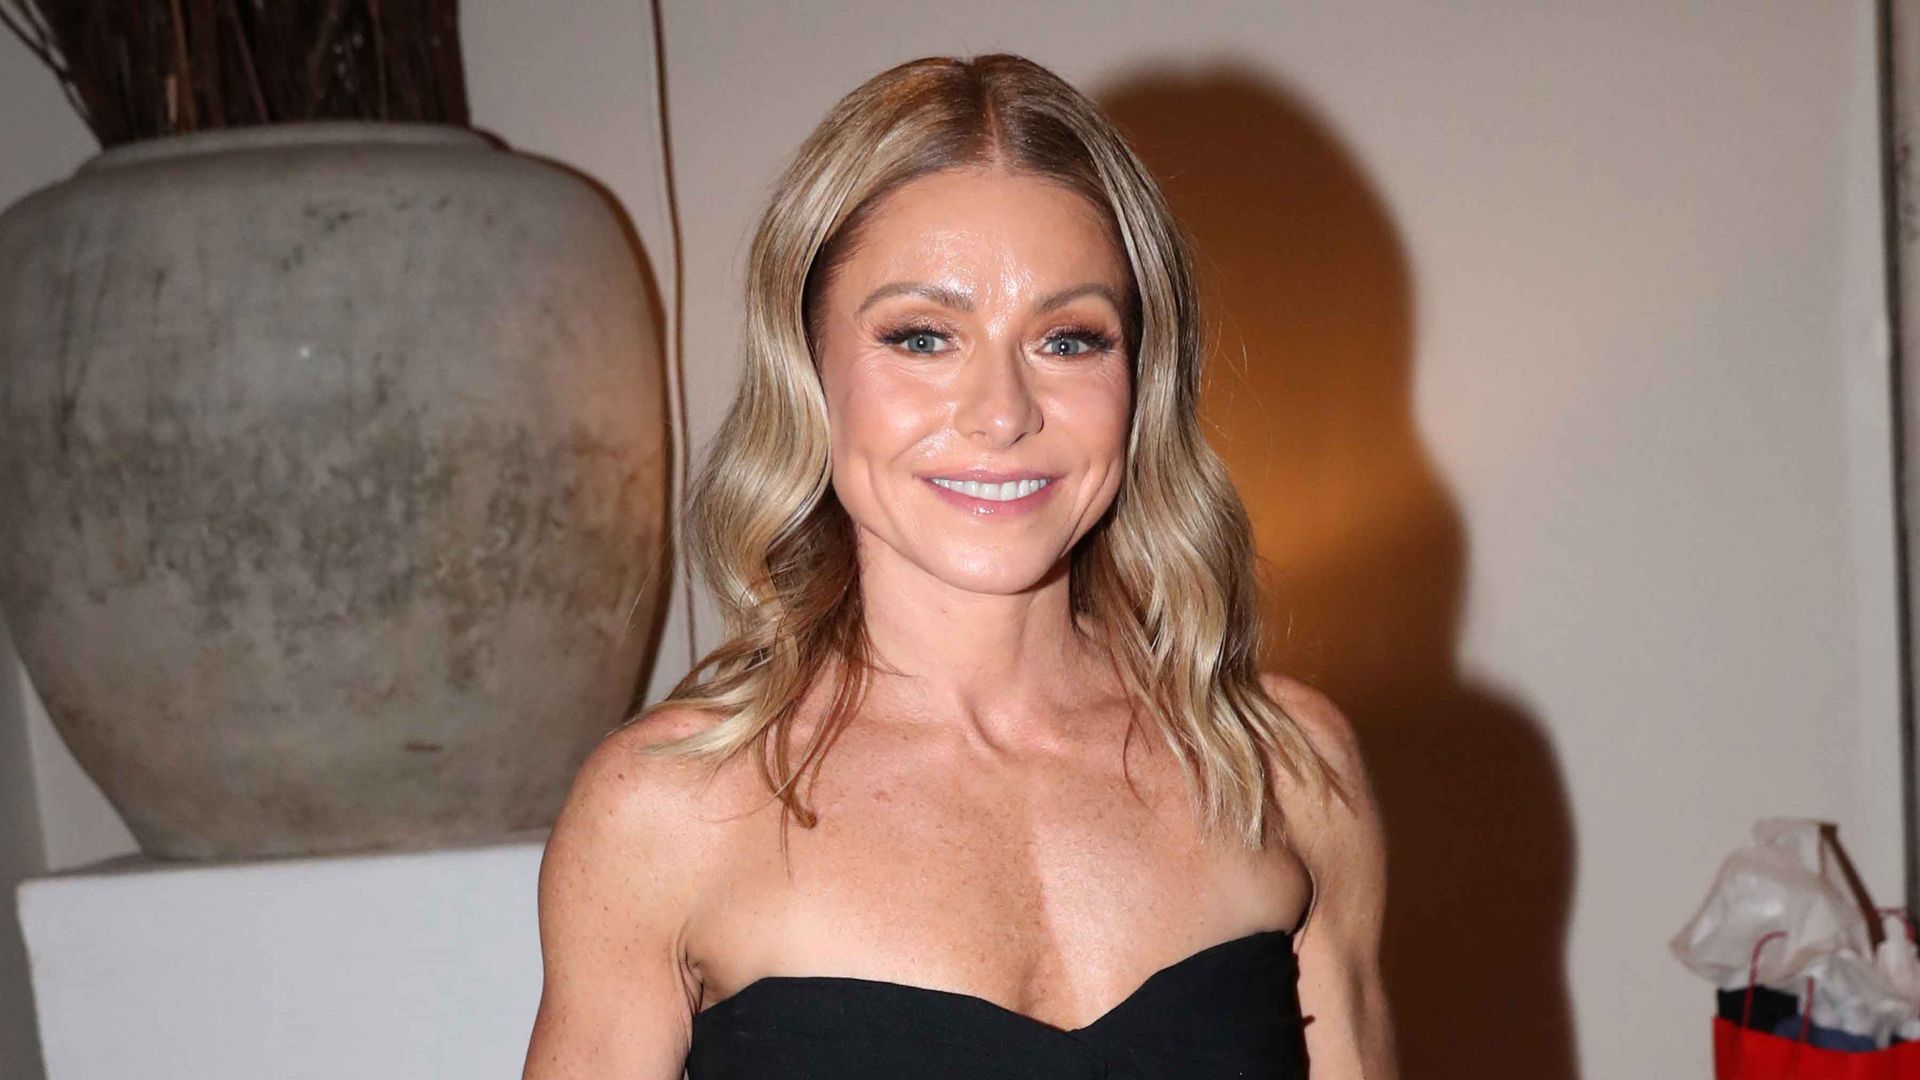 Kelly Ripa attends The Complexions Gala in NYC